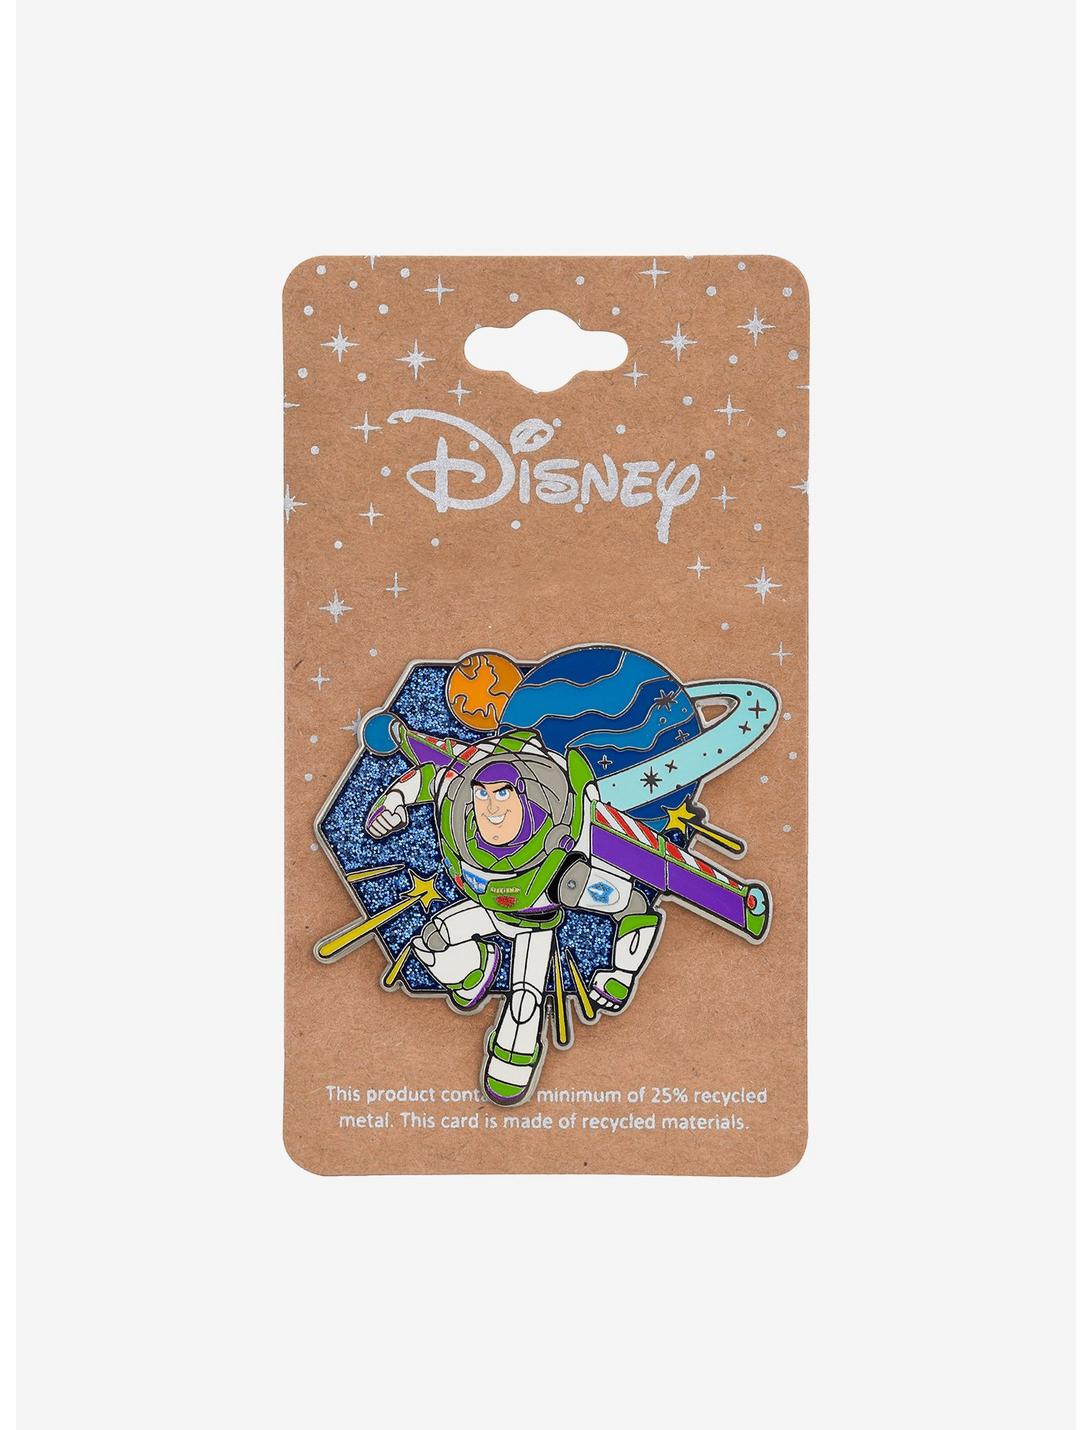 Disney Pixar Toy Story Buzz Lightyear Planets Enamel Pin - BoxLunch Exclusive, , hi-res